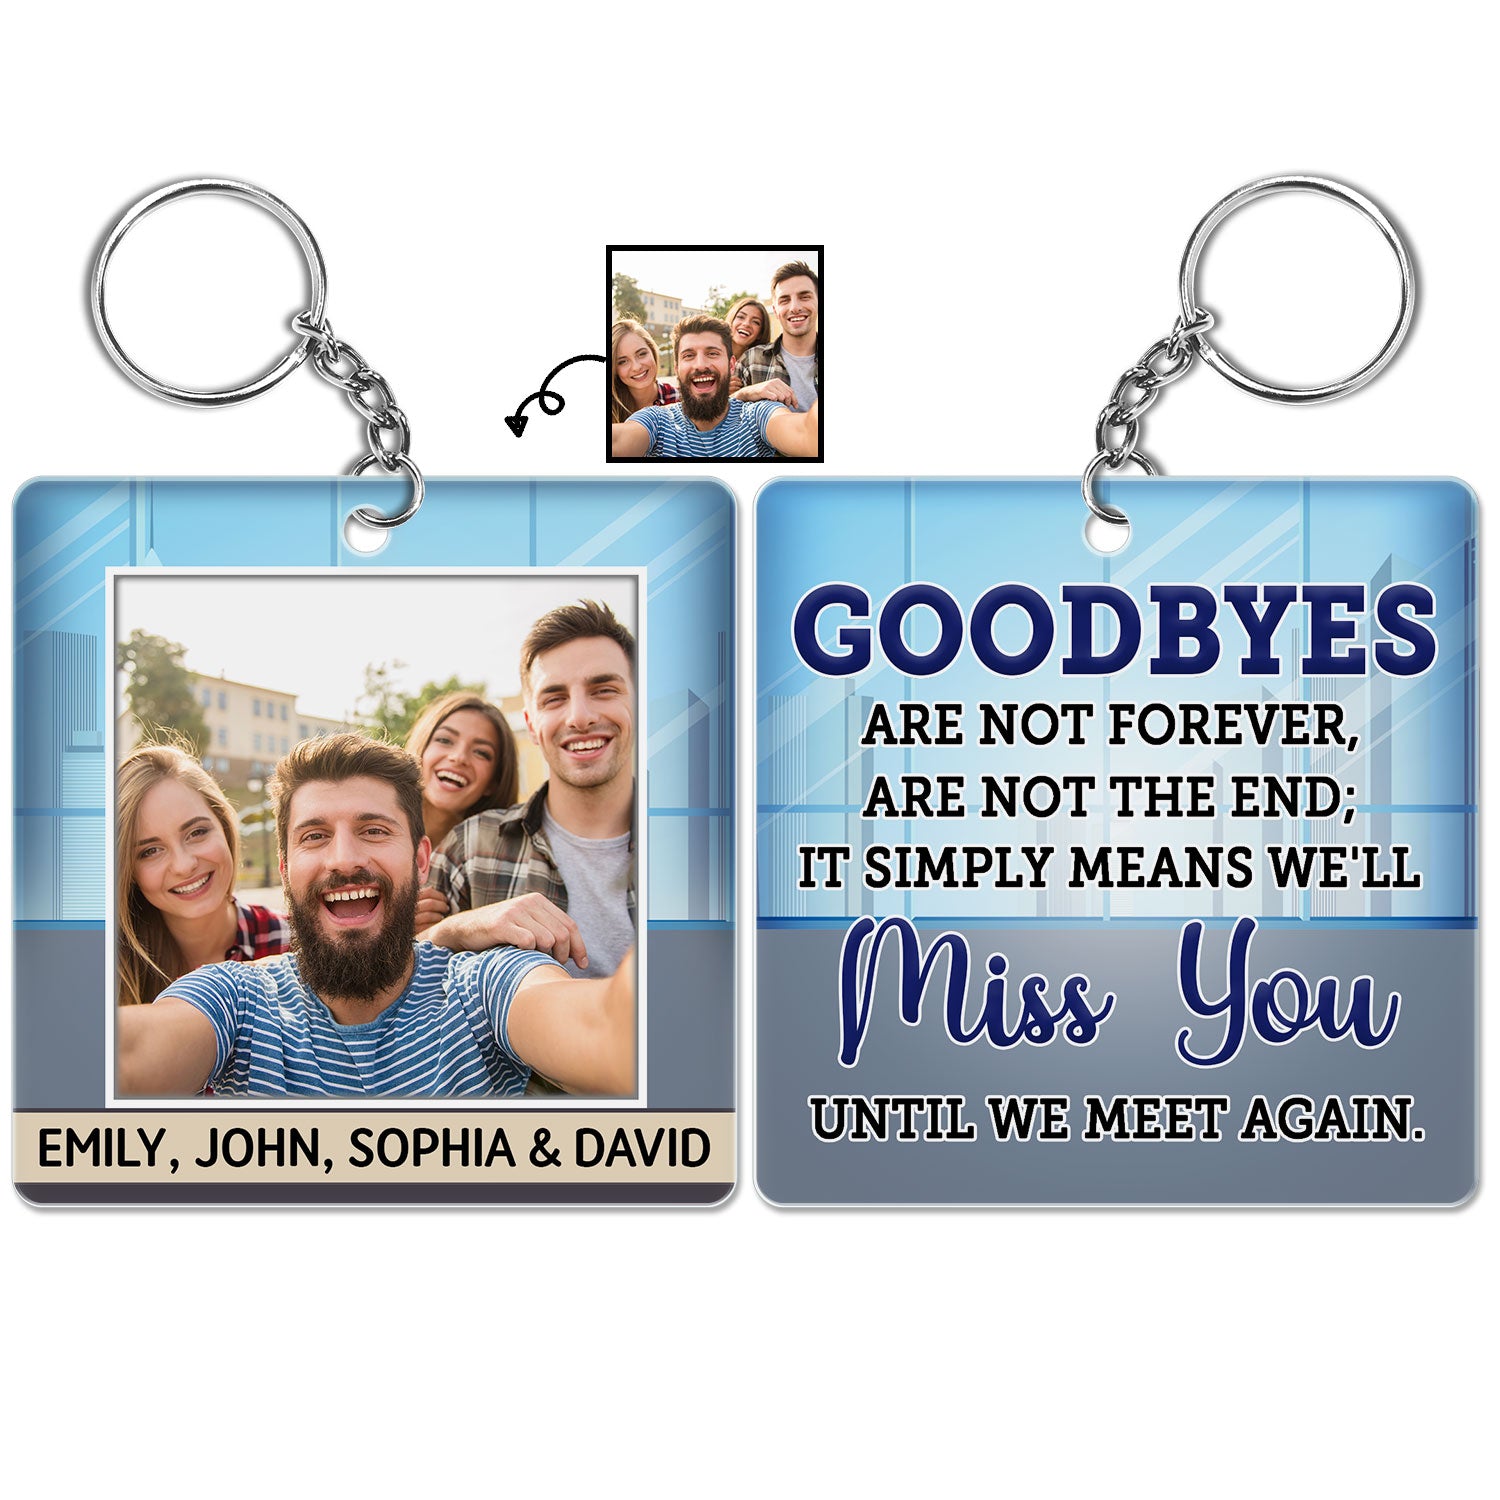 Custom Photo Goodbyes Are Not Forever We'll Miss You - Birthday, Loving Gift For Bestie, Colleague, Friend - Personalized Acrylic Keychain